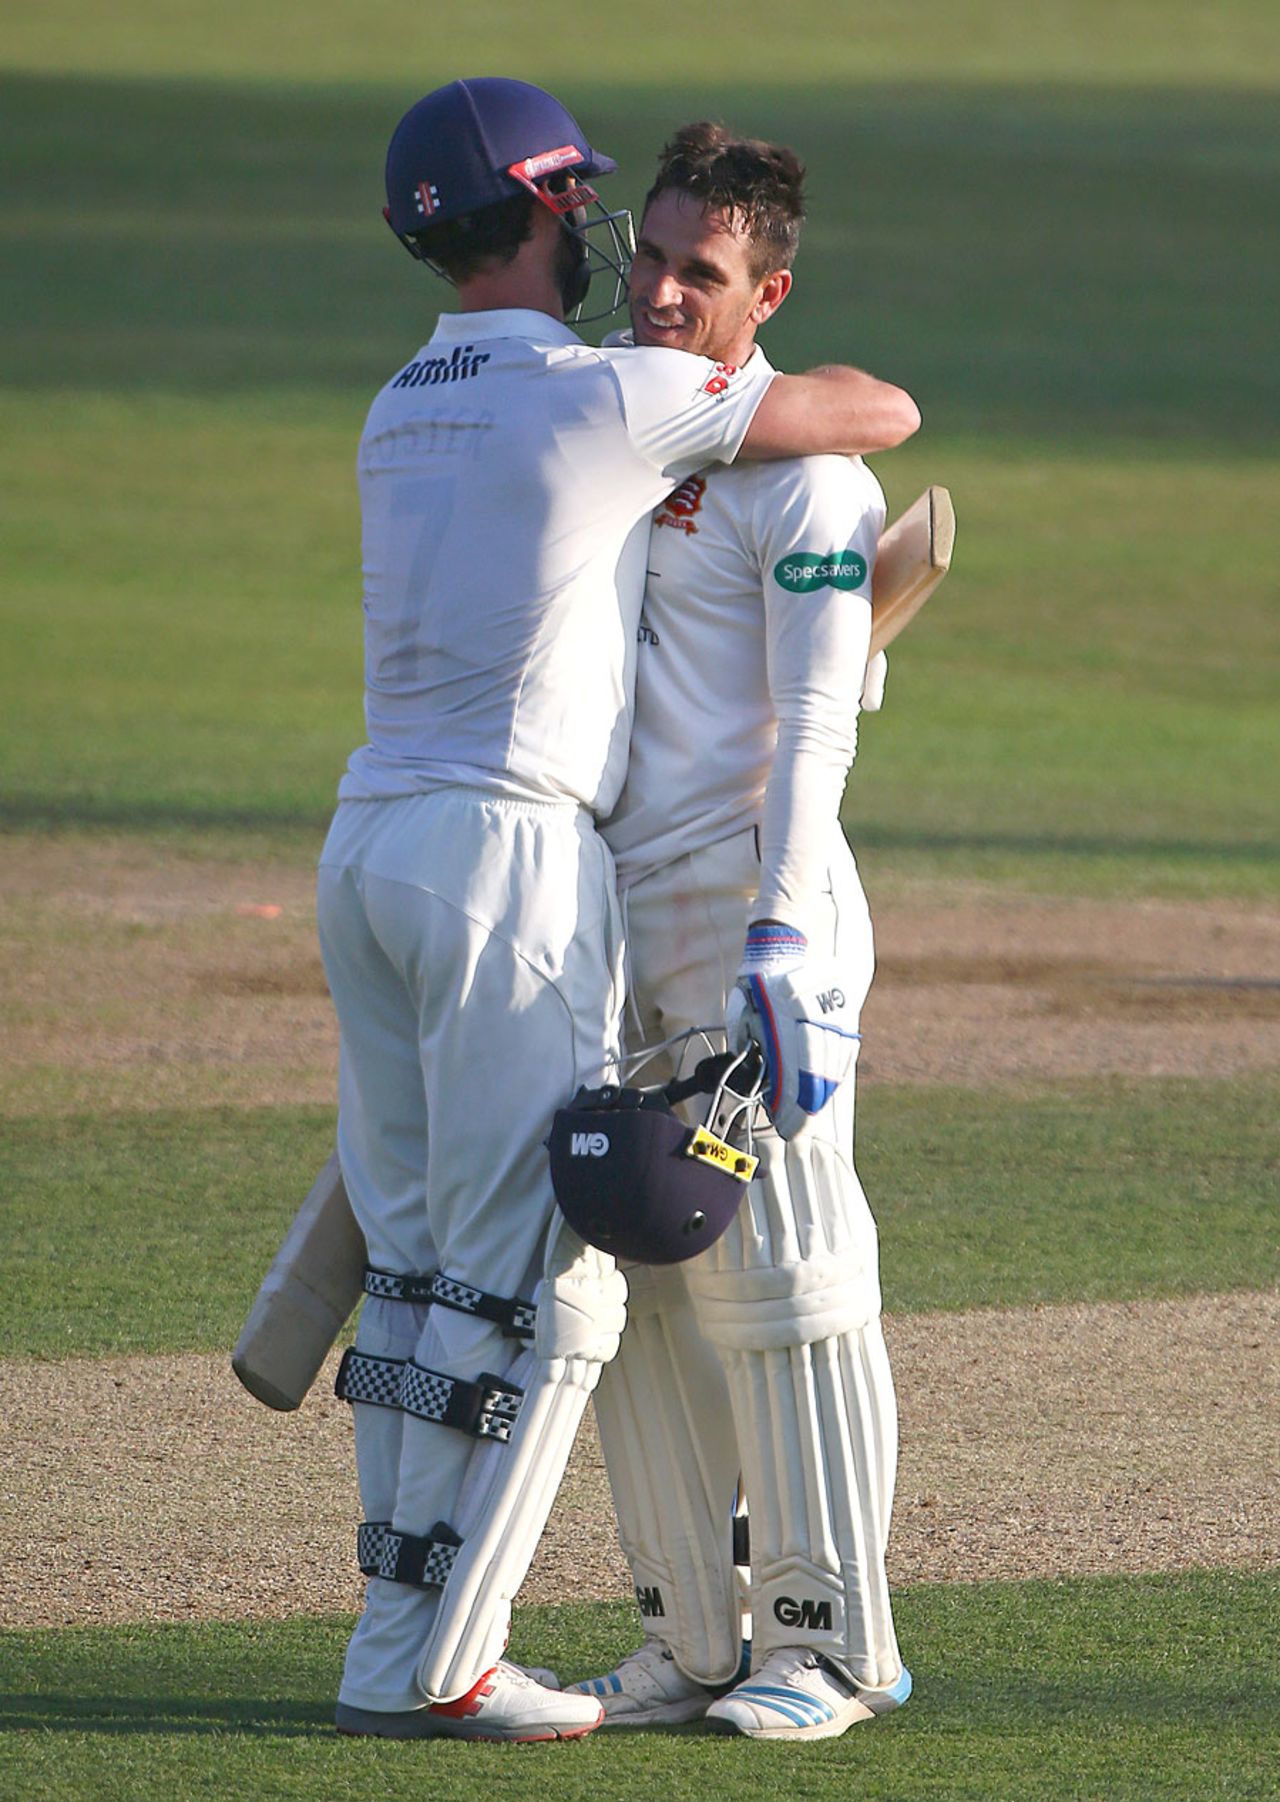 James Foster embraces Ryan ten Doeschate as the Division Two title is clinched, Essex v Glamorgan, County Championship, Division Two, Chelmsford, 2nd day, September 13, 2016